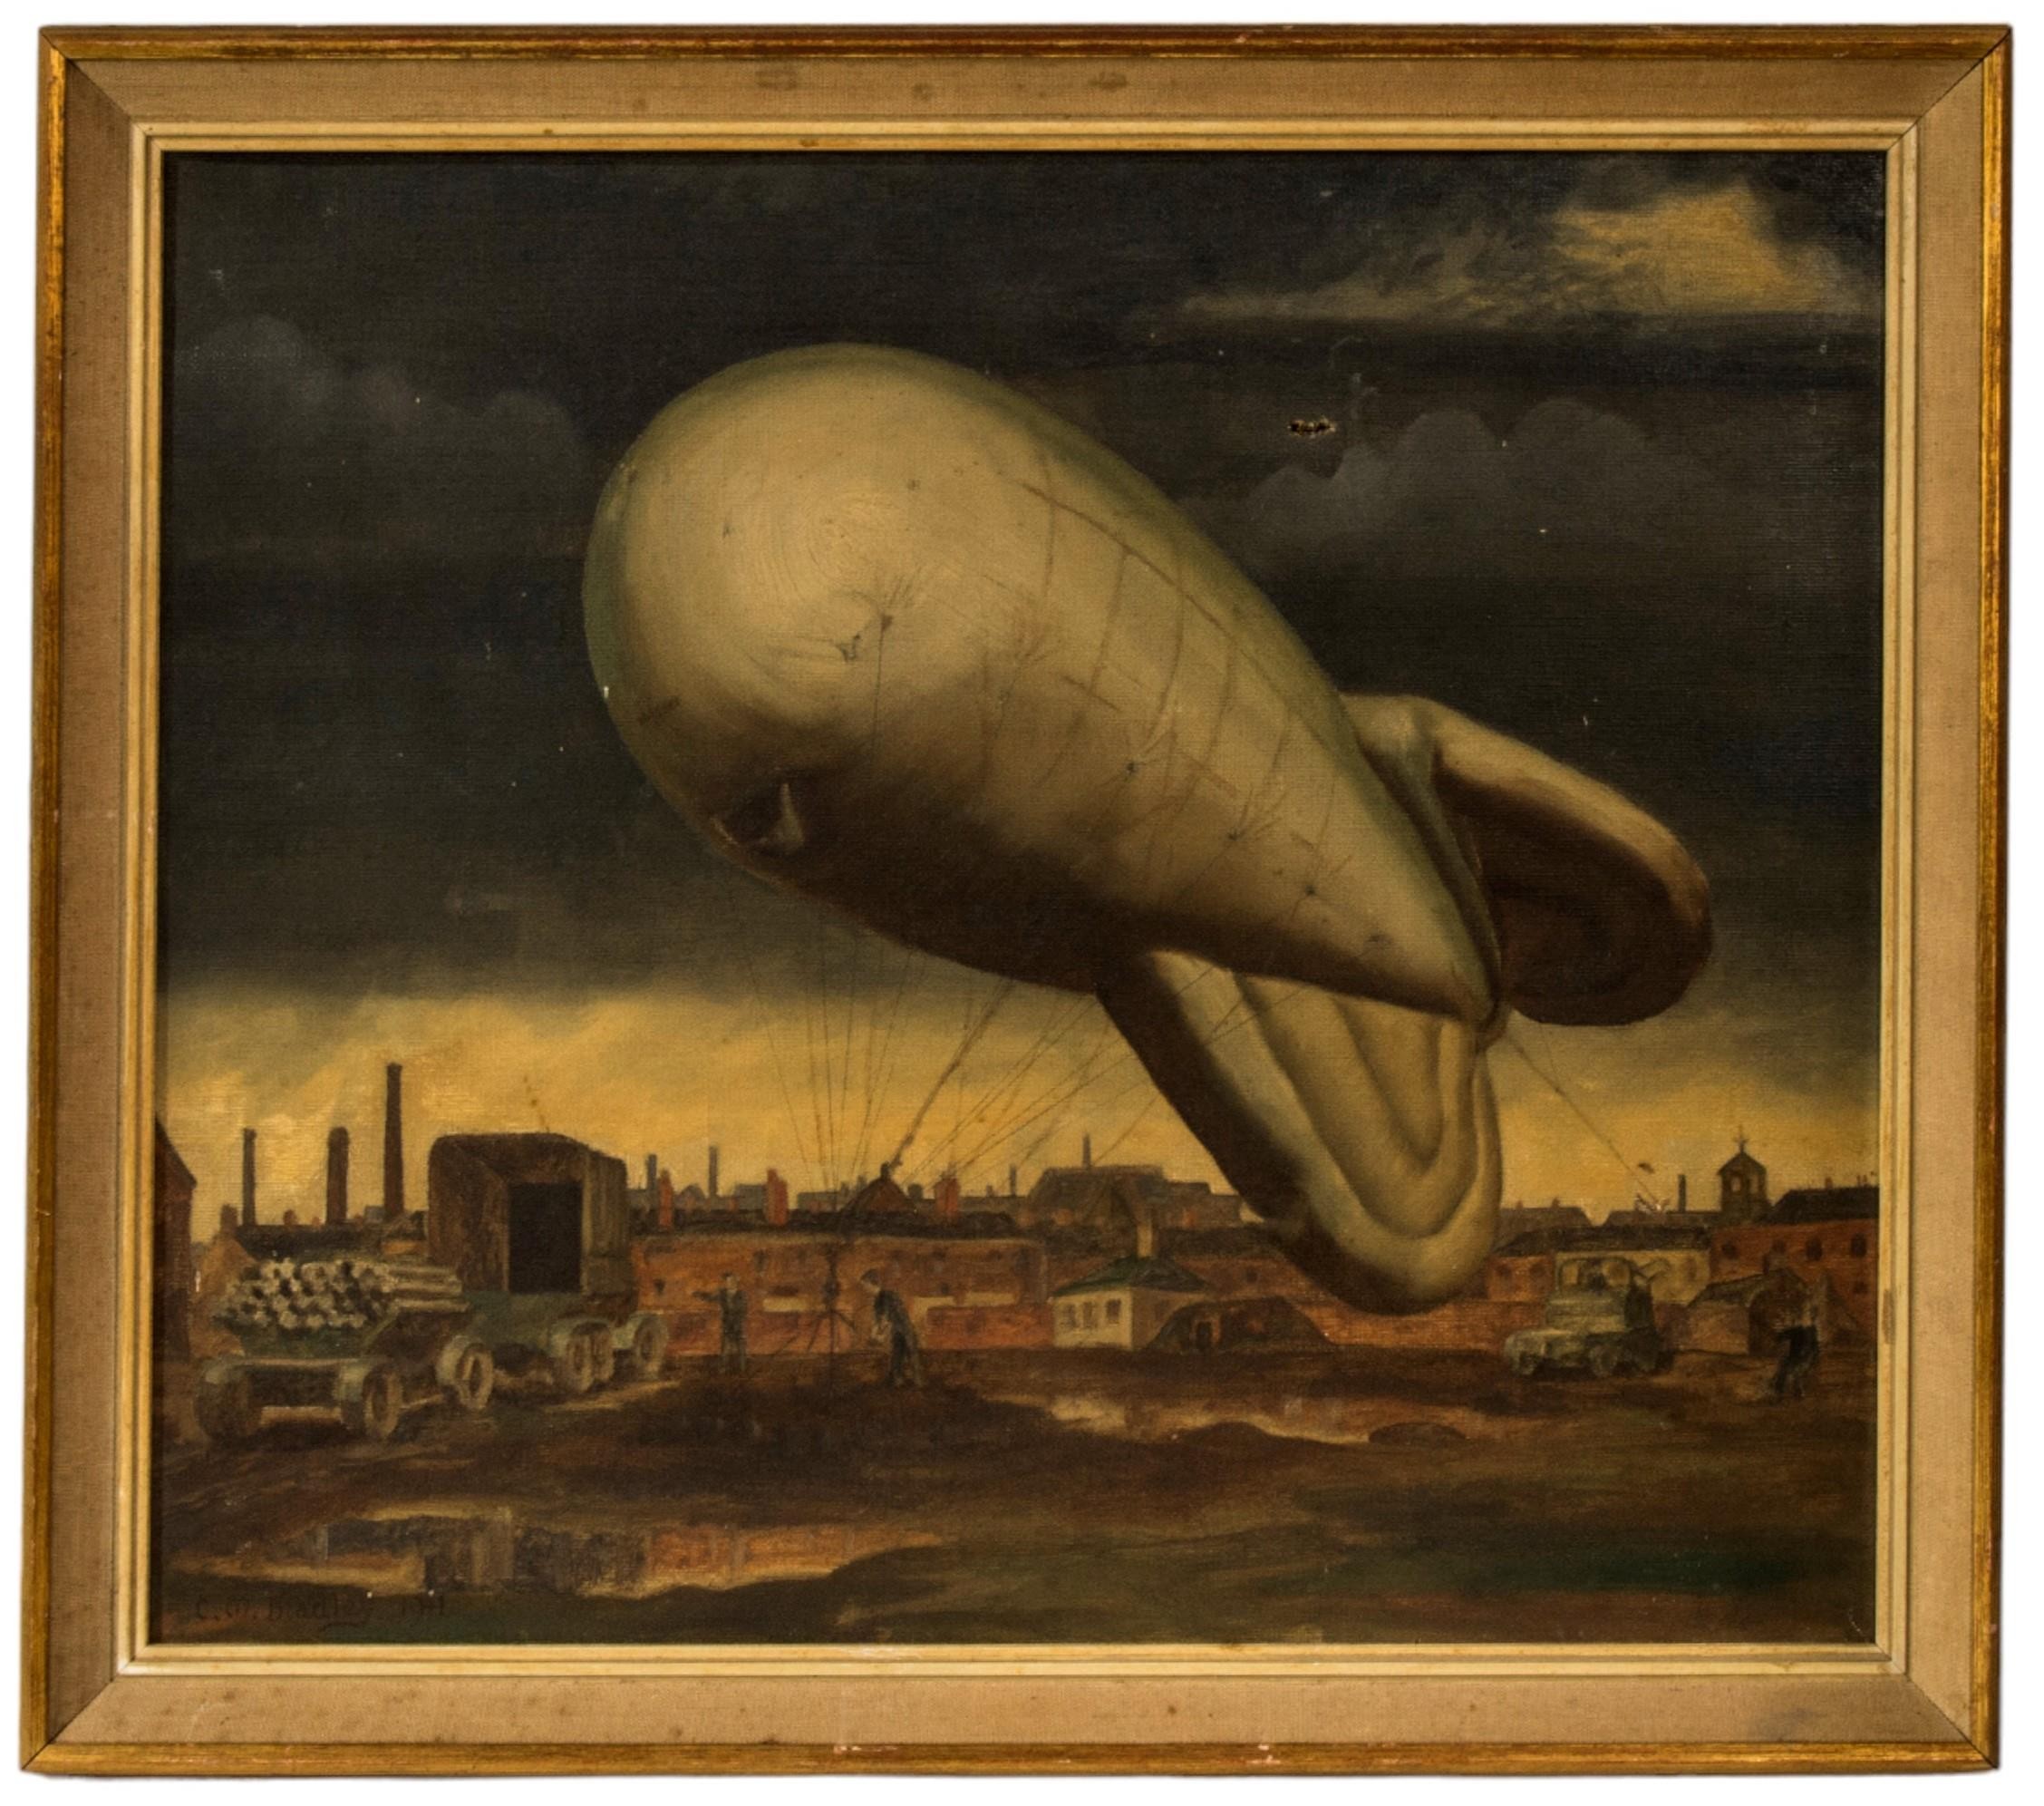 A MID 20TH CENTURY OIL PAINTING ON CANVAS, depicting figures preparing a barrage balloon, in an